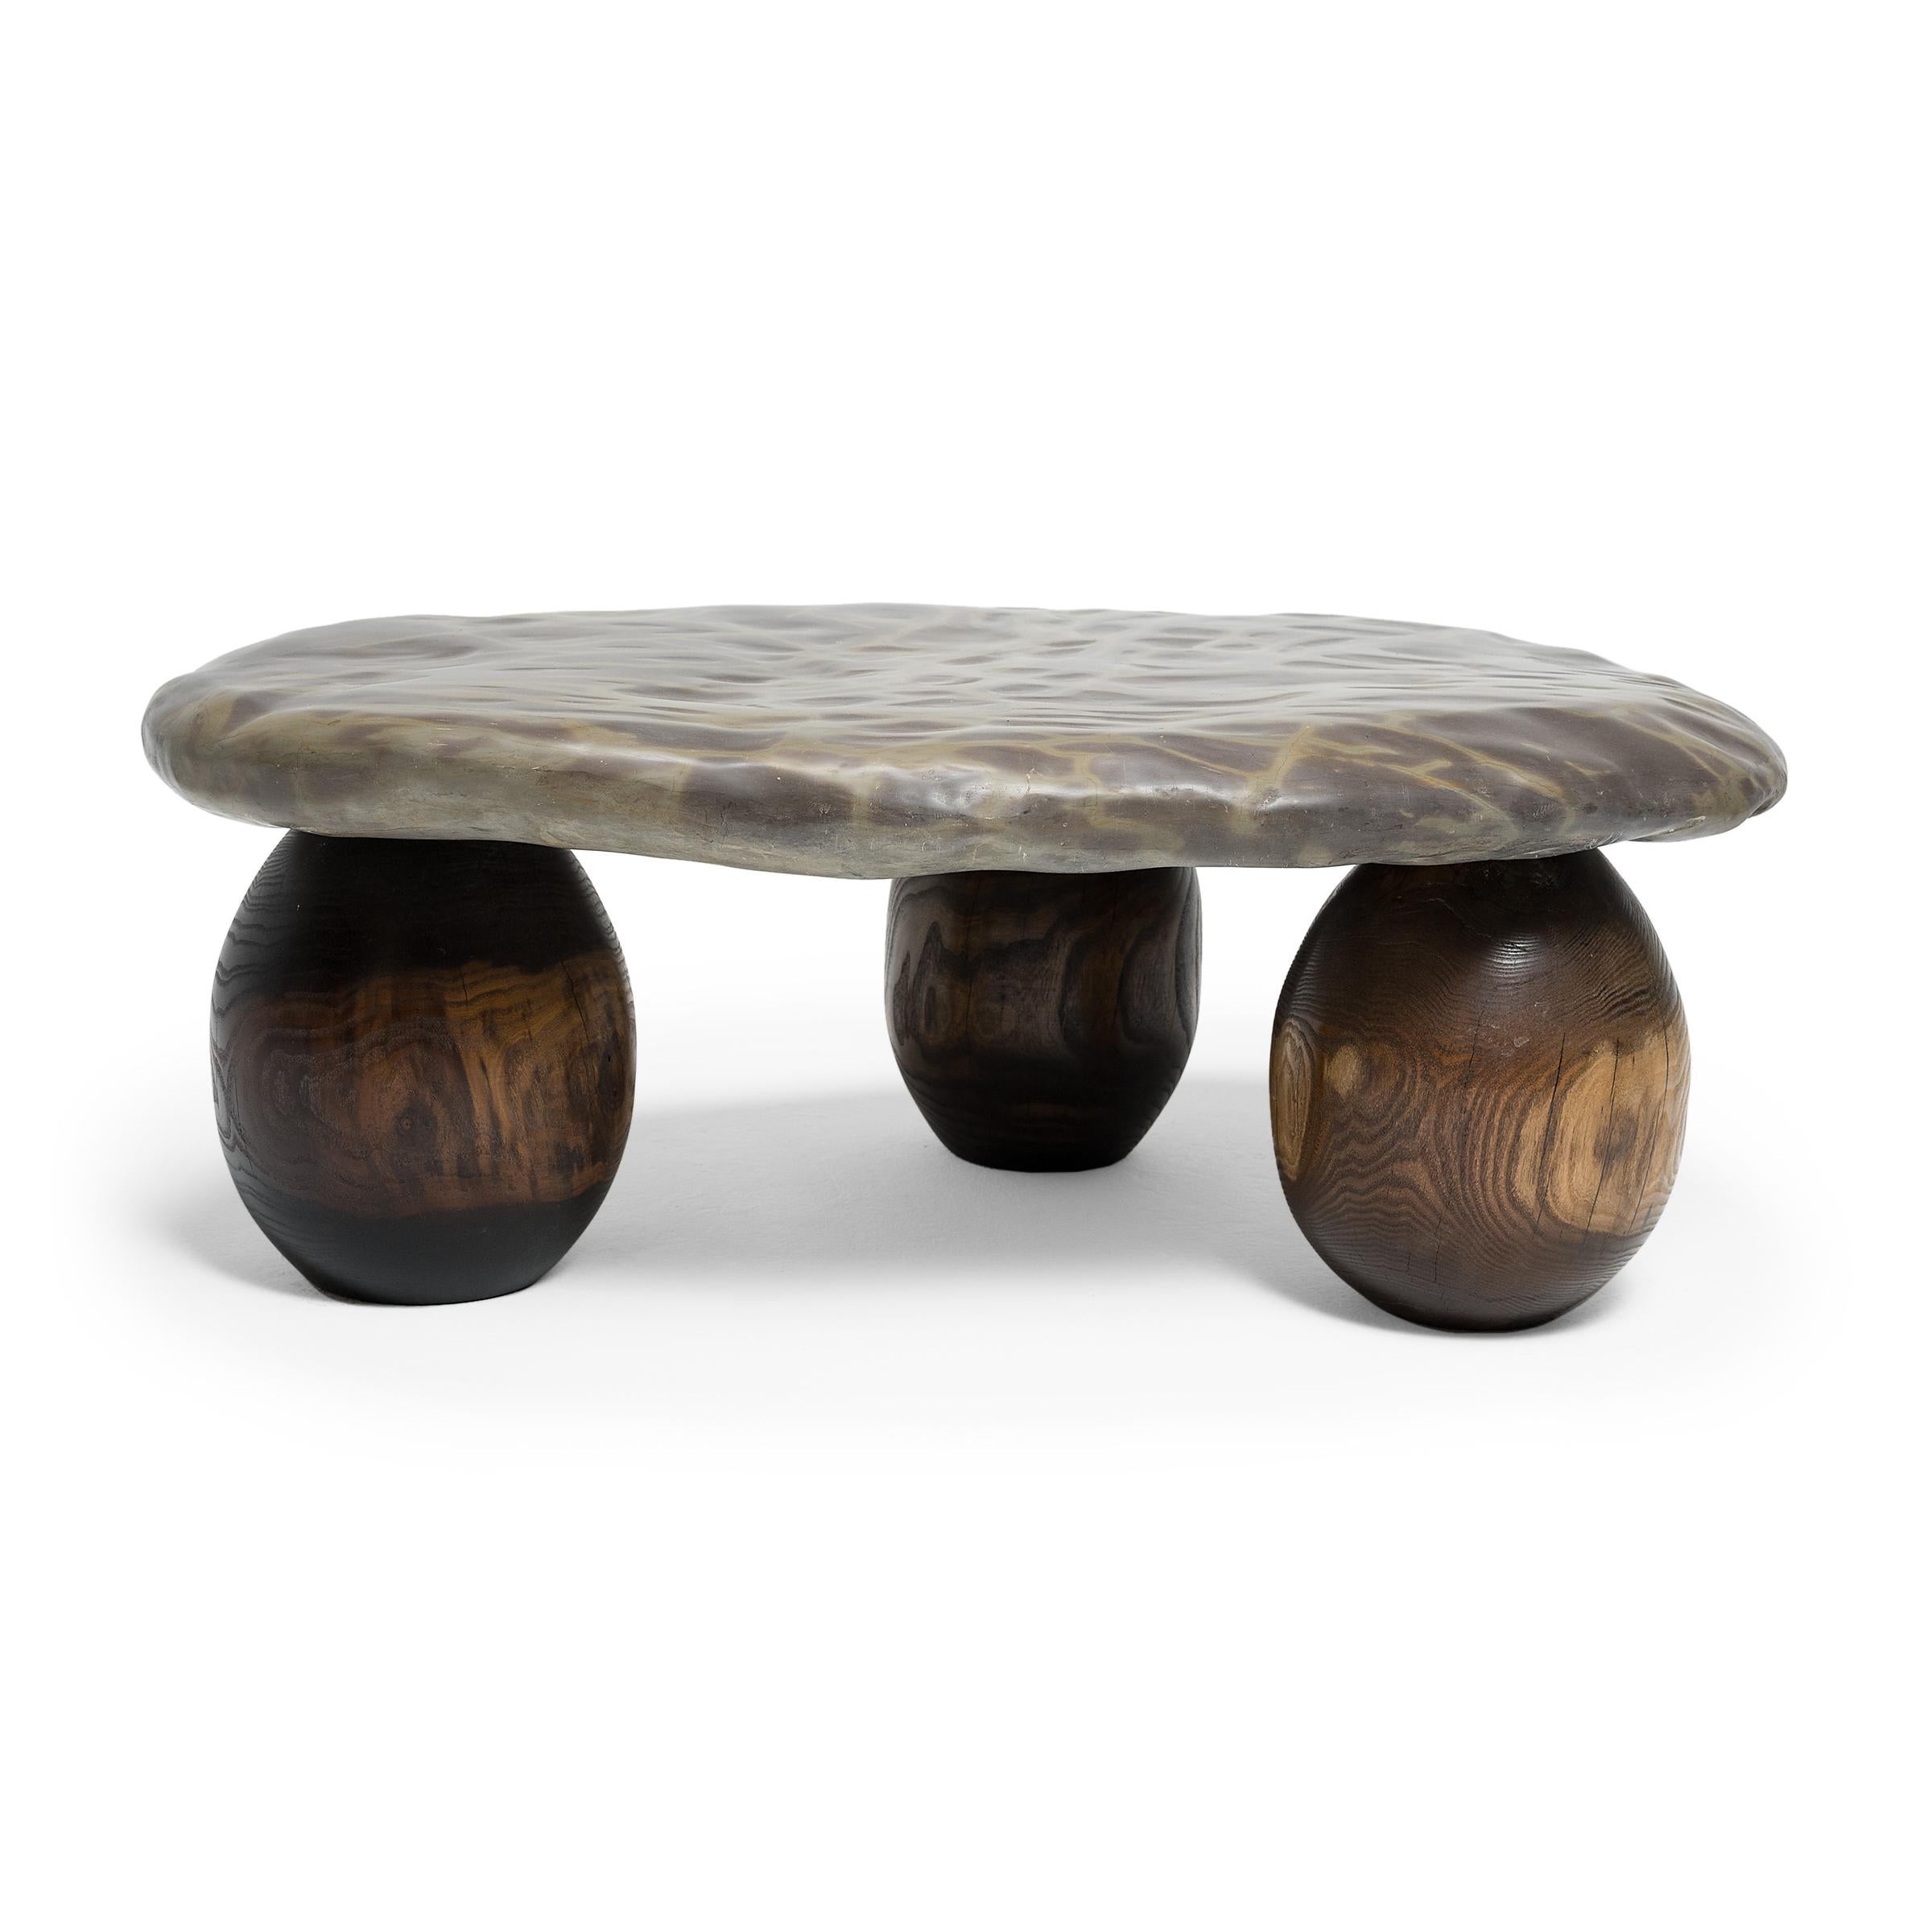 This stone top coffee table exemplifies organic modern style with its sleek design and incredible mix of natural textures. The table is comprised of a polished stone slab and a custom base of three reclaimed red oak spheres.

Mineral inclusions of